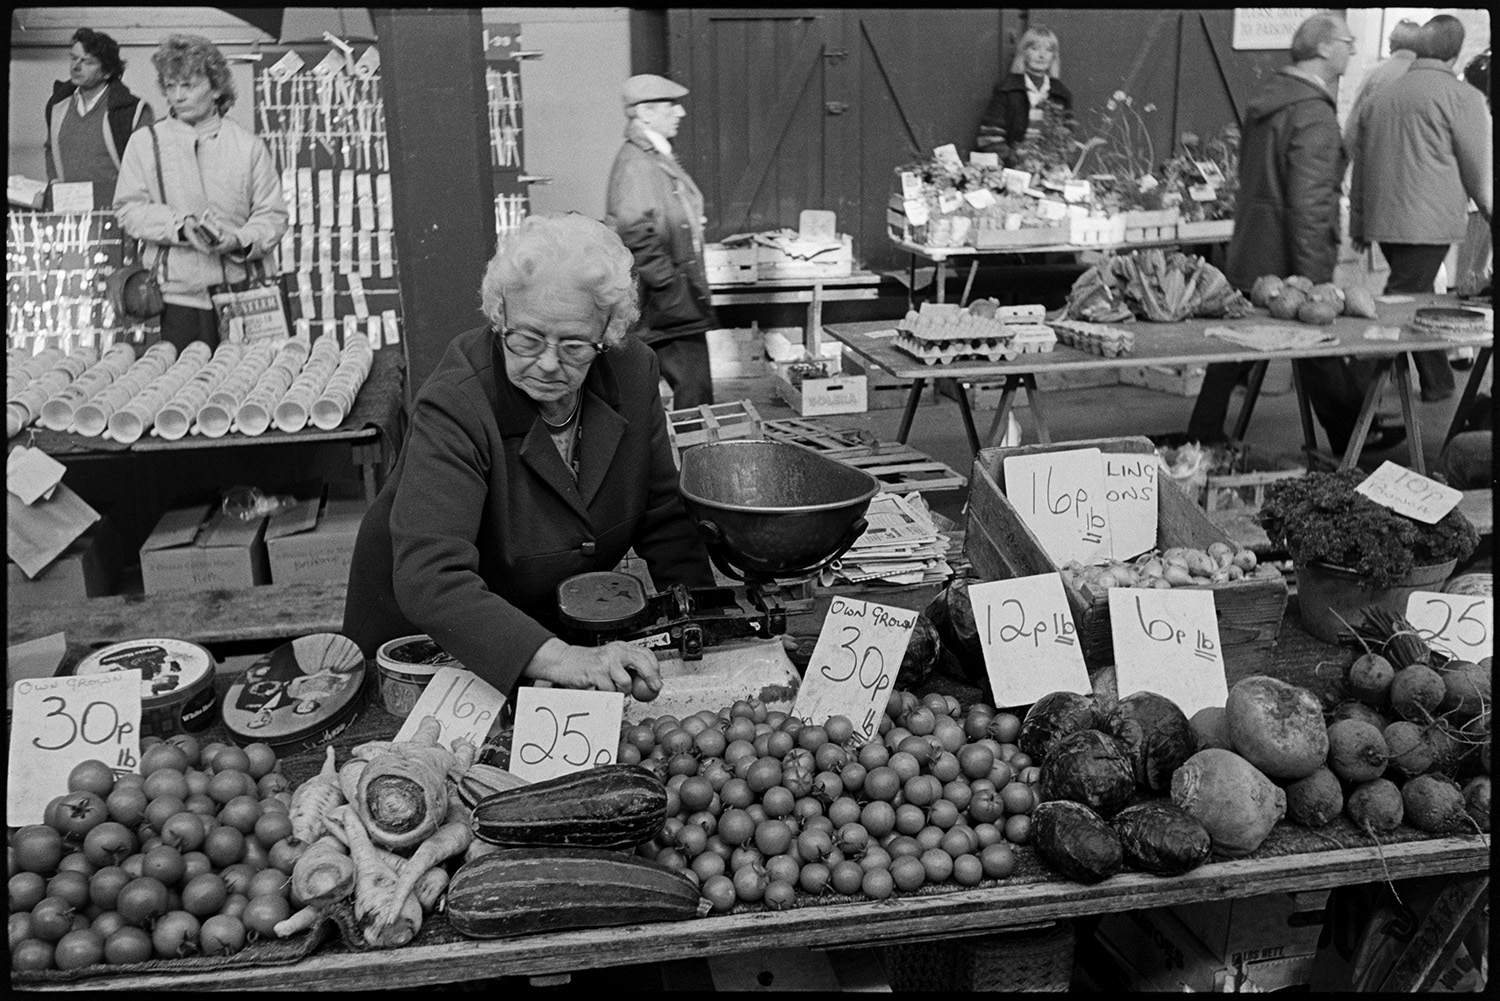 Pannier market with stalls of fruit, vegetables, eggs. 
[A woman running a vegetable stall at Barnstaple Pannier Market. She is selling tomatoes which are home grown, marrows, parsnips, swedes, beetroot and onions. There is also a set of scales on the stall. Other stalls with eggs and mugs can be seen in the background.]